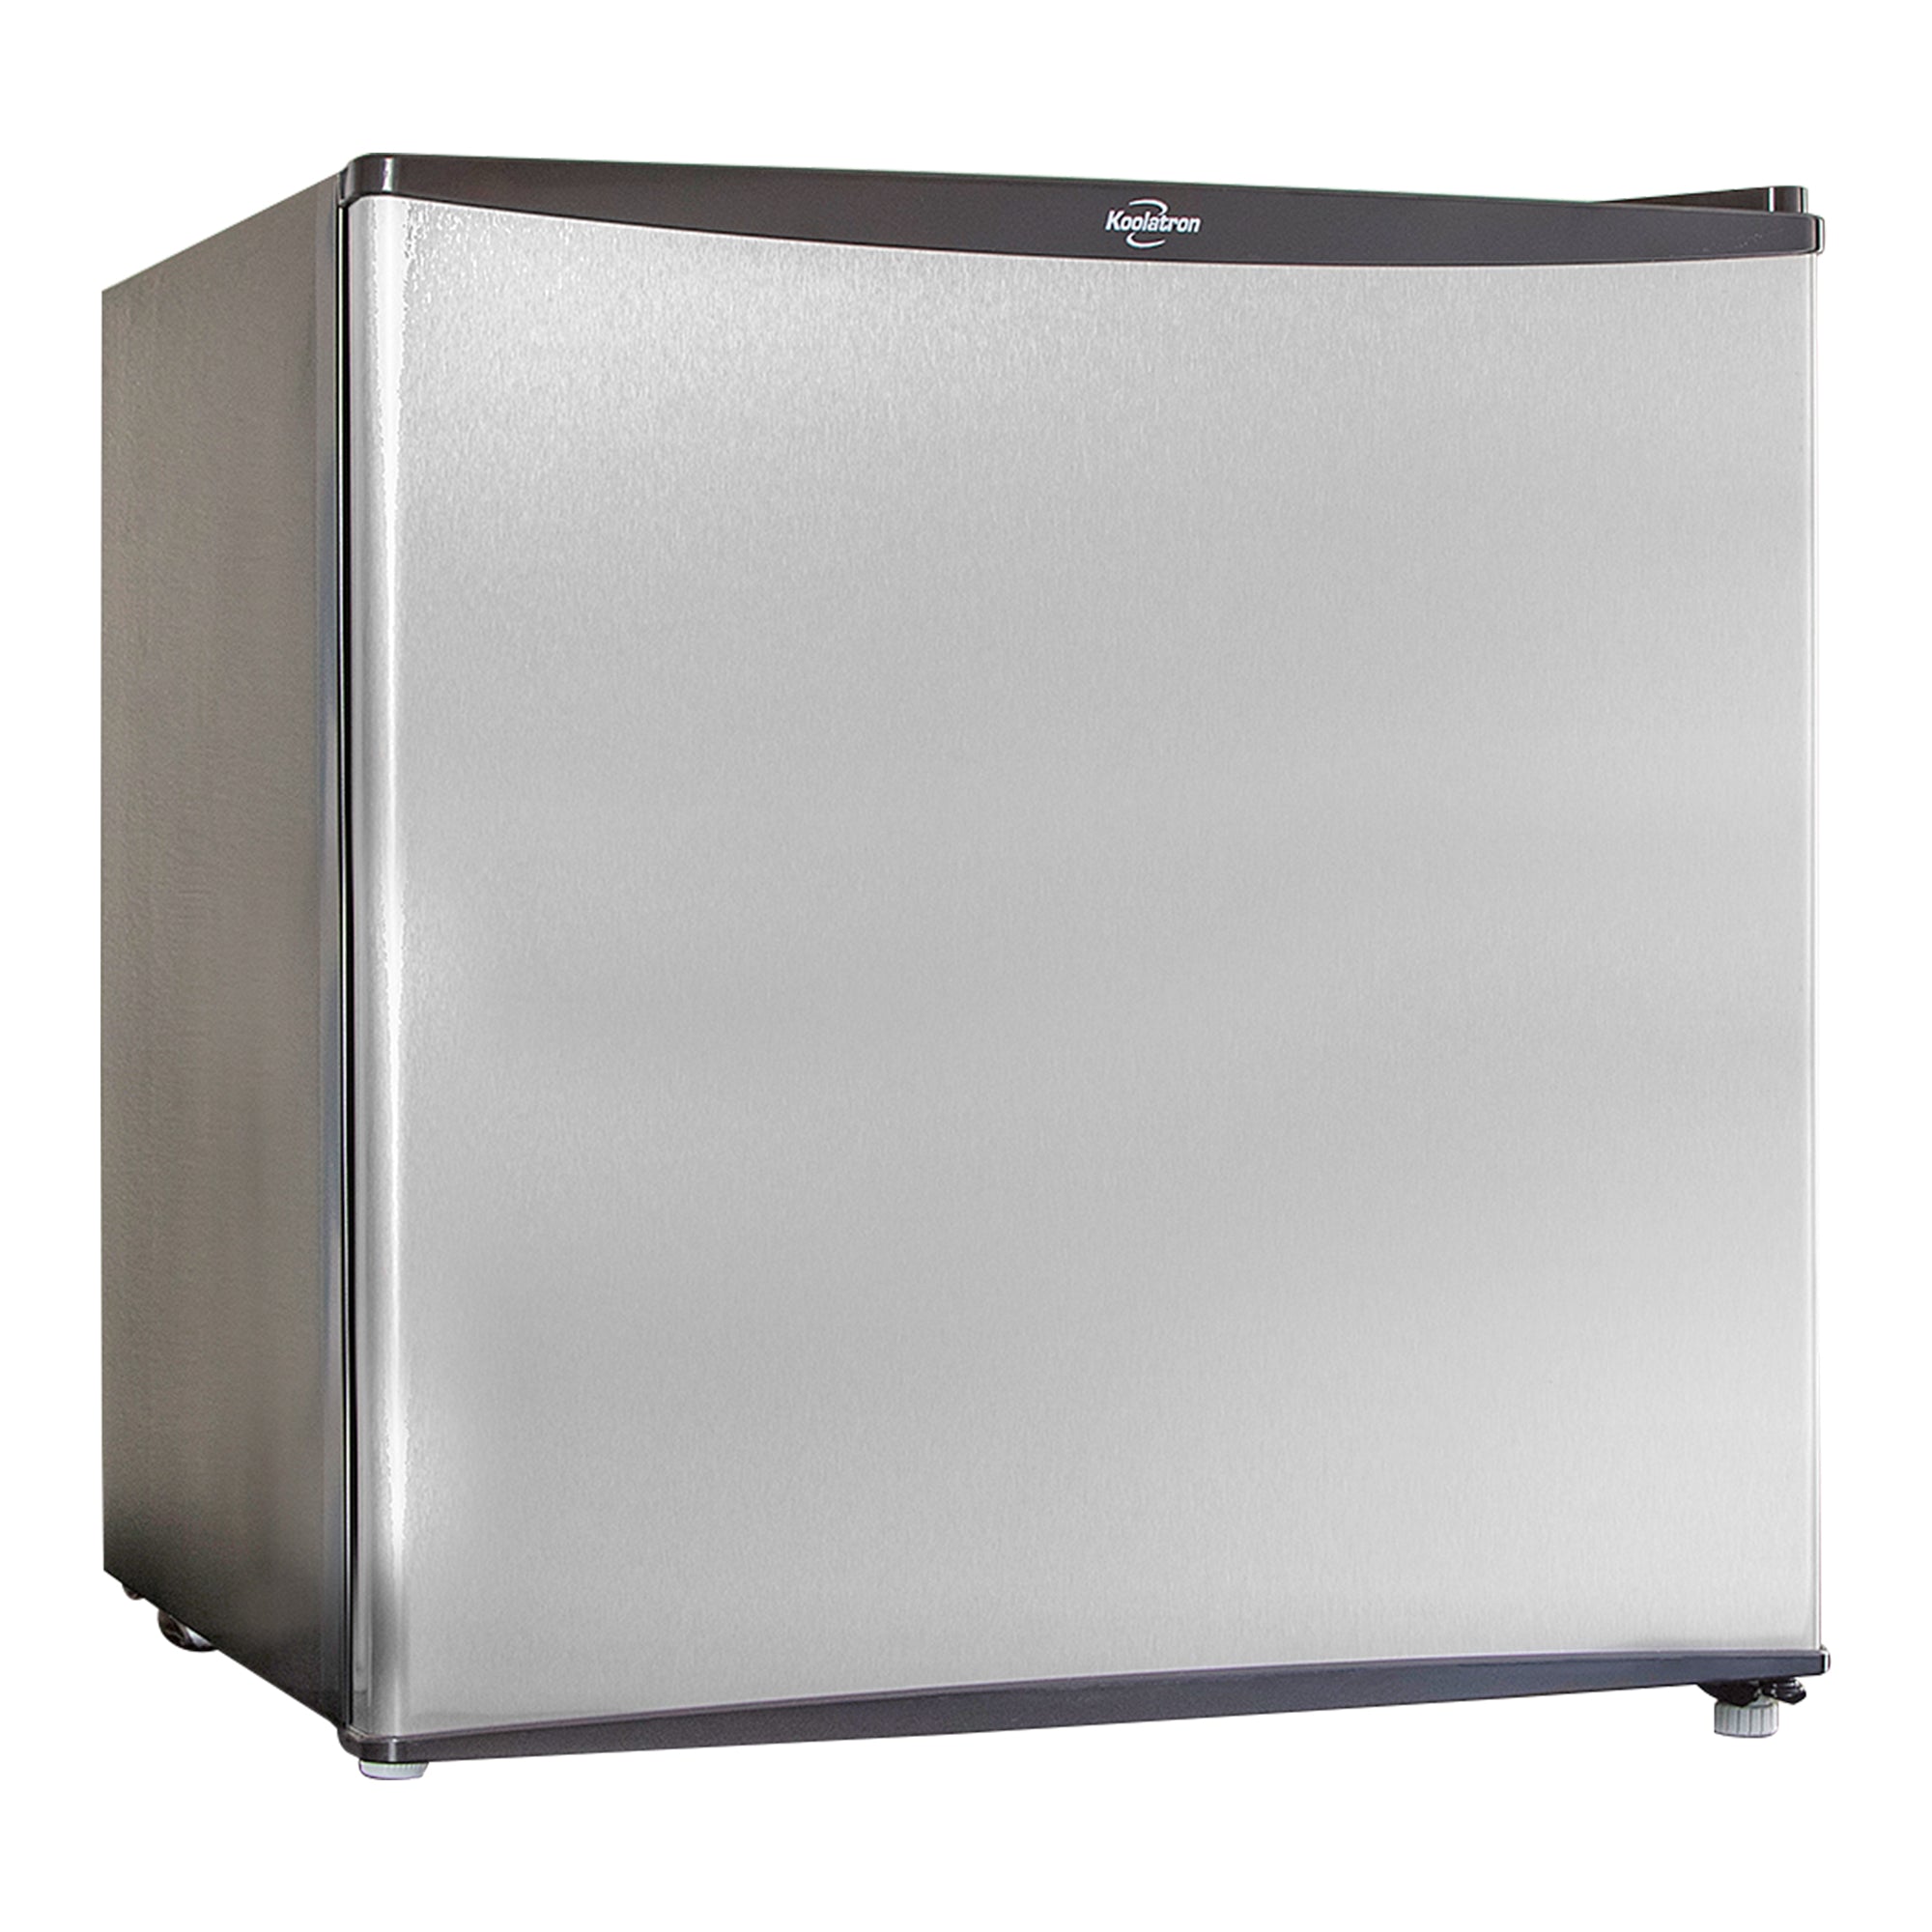 Black and stainless steel compact fridge with freezer on a white background